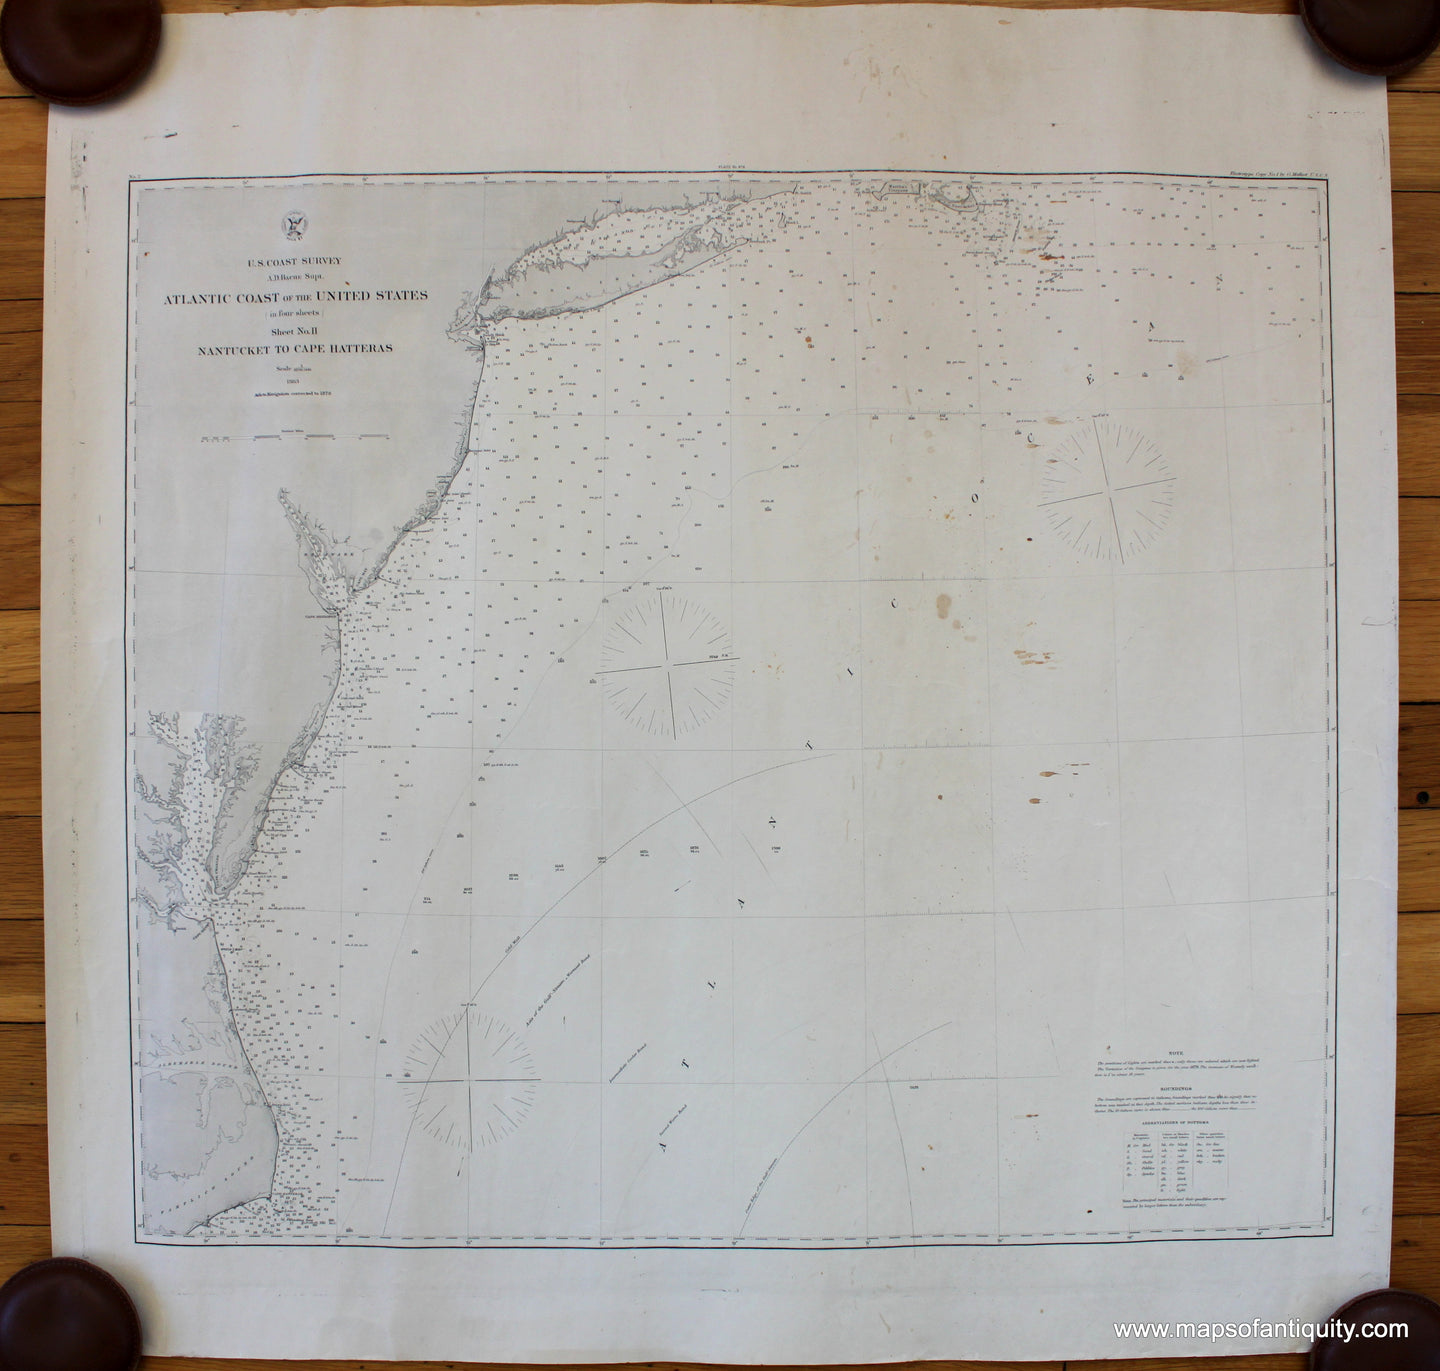 Antique-nautical-chart-restrike-Atlantic-Coast-Middle-United-States-Nantucket-Cape-Hatteras-mid-Atlantic-South-New-York-New-Jersey-USCS-20th-Century-Maps-of-Antiquity